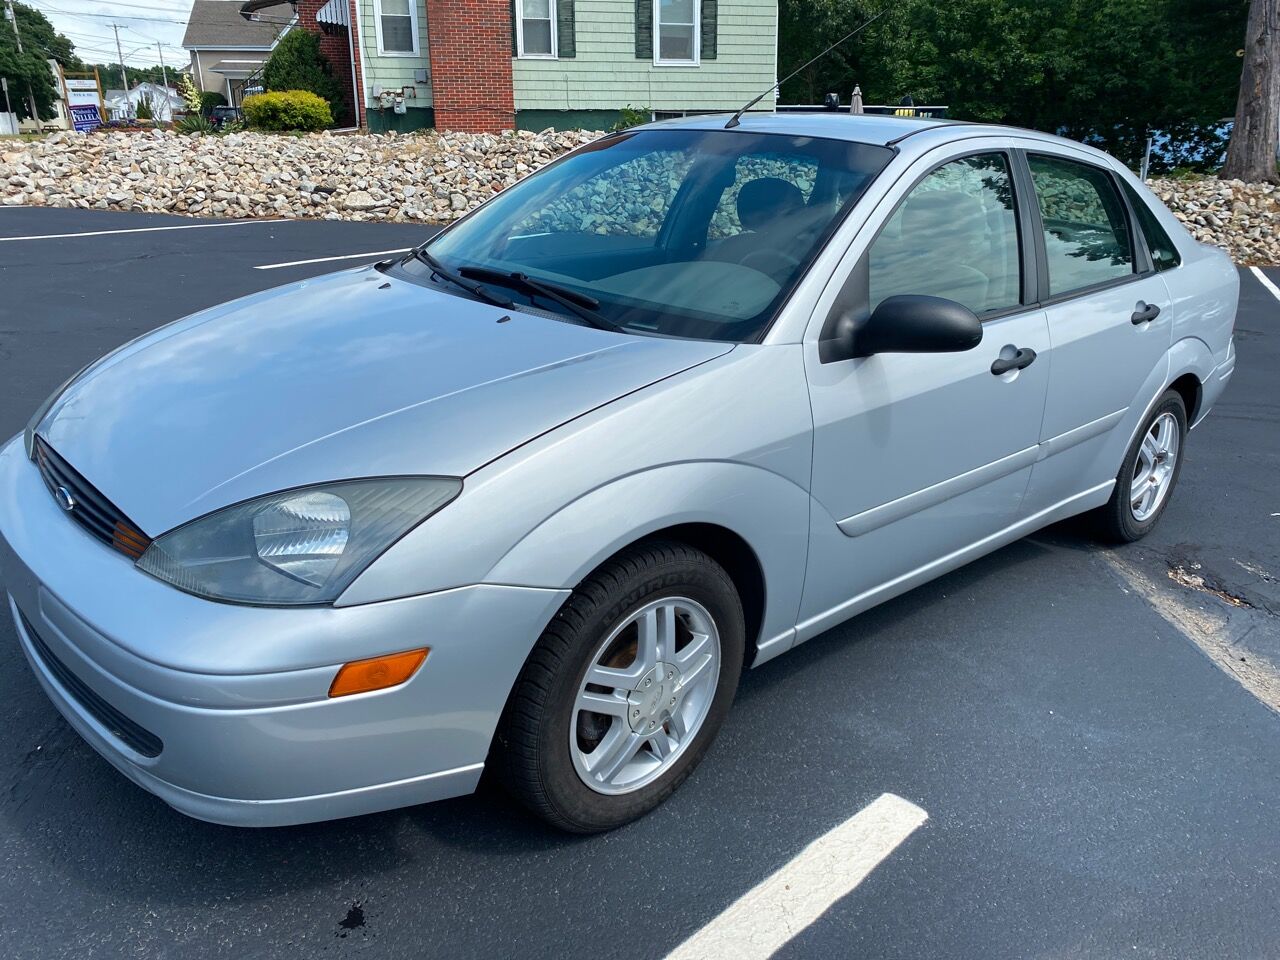 2003 Ford Focus For Sale - Carsforsale.com®